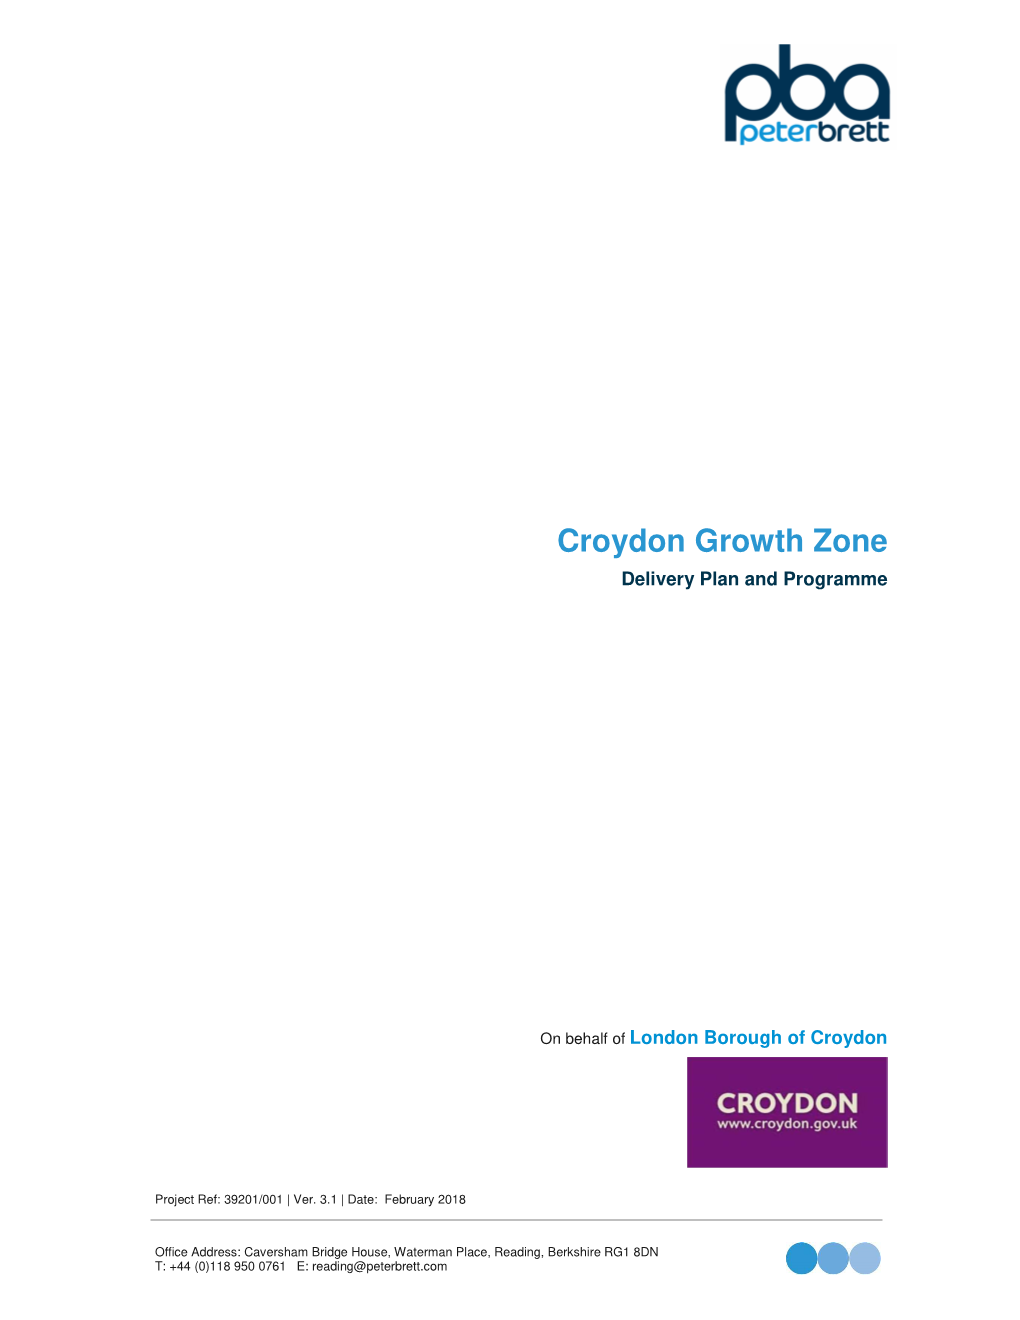 Croydon Growth Zone Delivery Plan and Programme